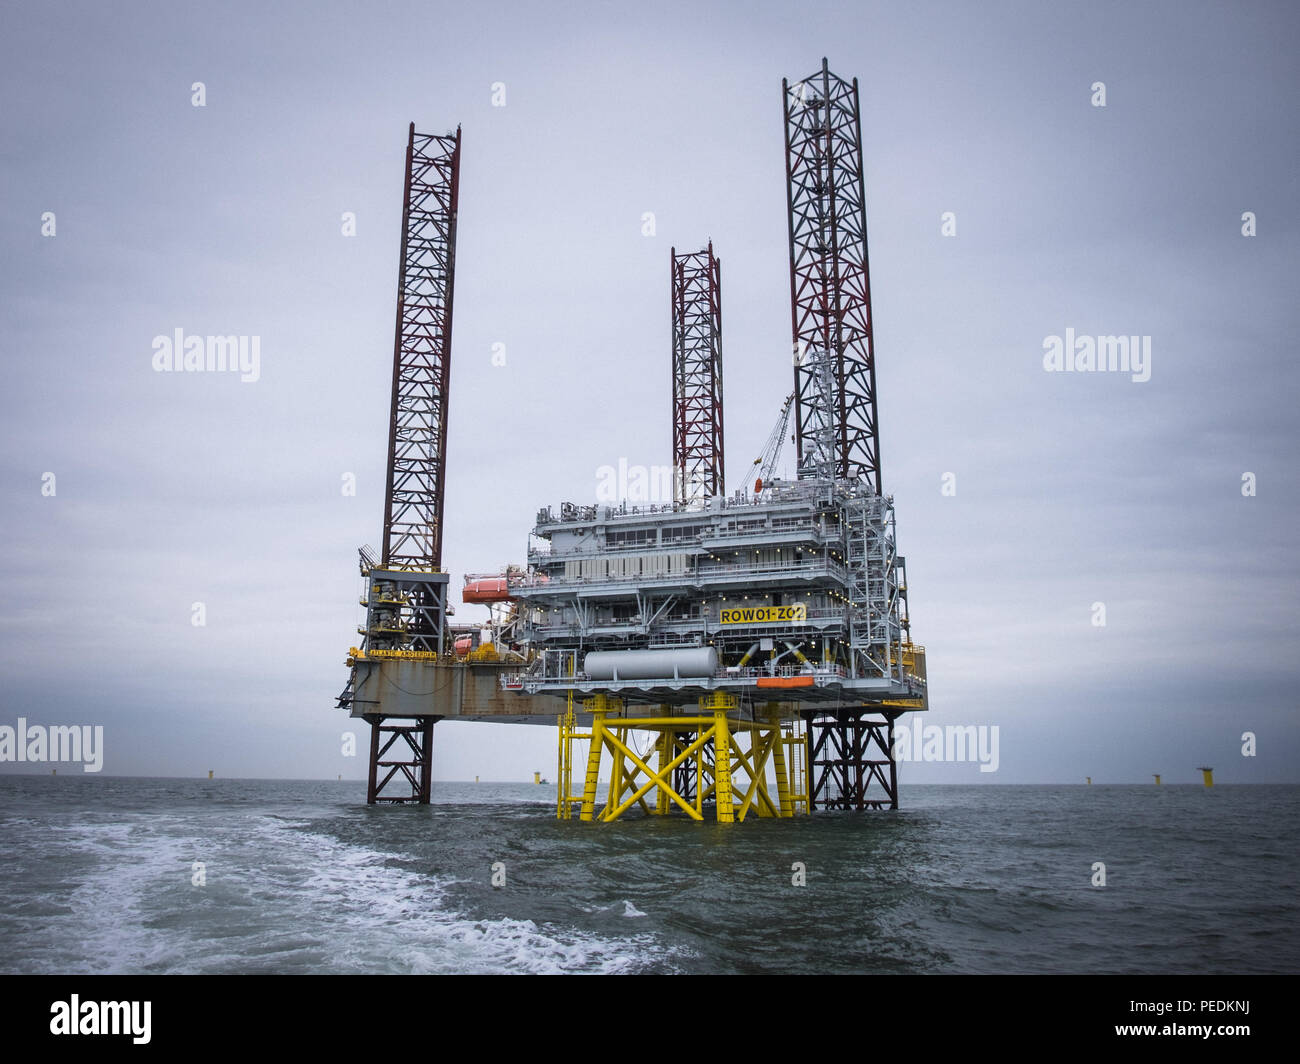 The Atlantic Amsterdam jacked up next to the first Race Bank Offshore Wind Farm (ROW01-Z02) substation. Stock Photo